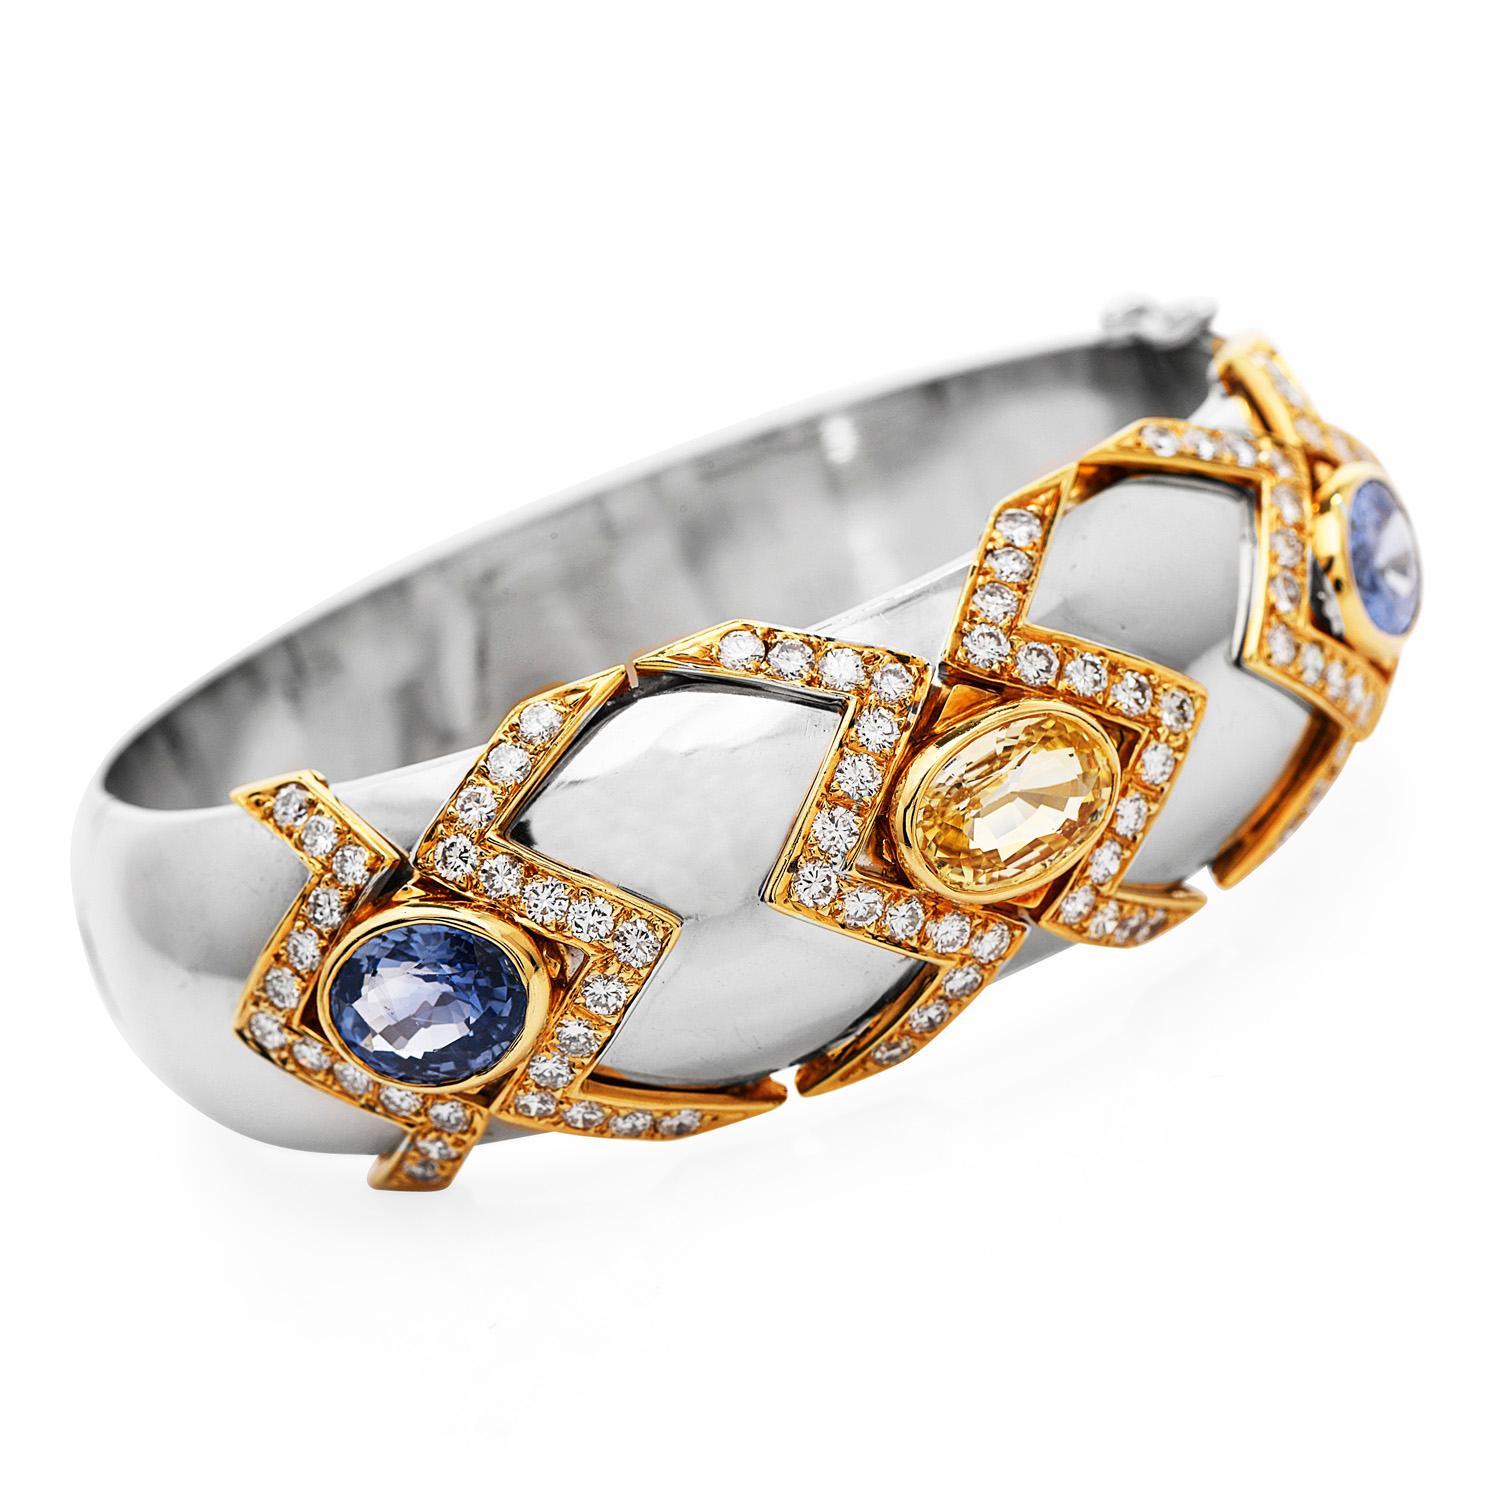 This Exquisite GIA Certified High Polish Bracelet is made in platinum and 18k yellow Gold
Certified  NO Heat Sapphires on the bracelet,  are composed of (3) Unheated all-natural without any treatments of Yellow & Blue sapphire GIA.